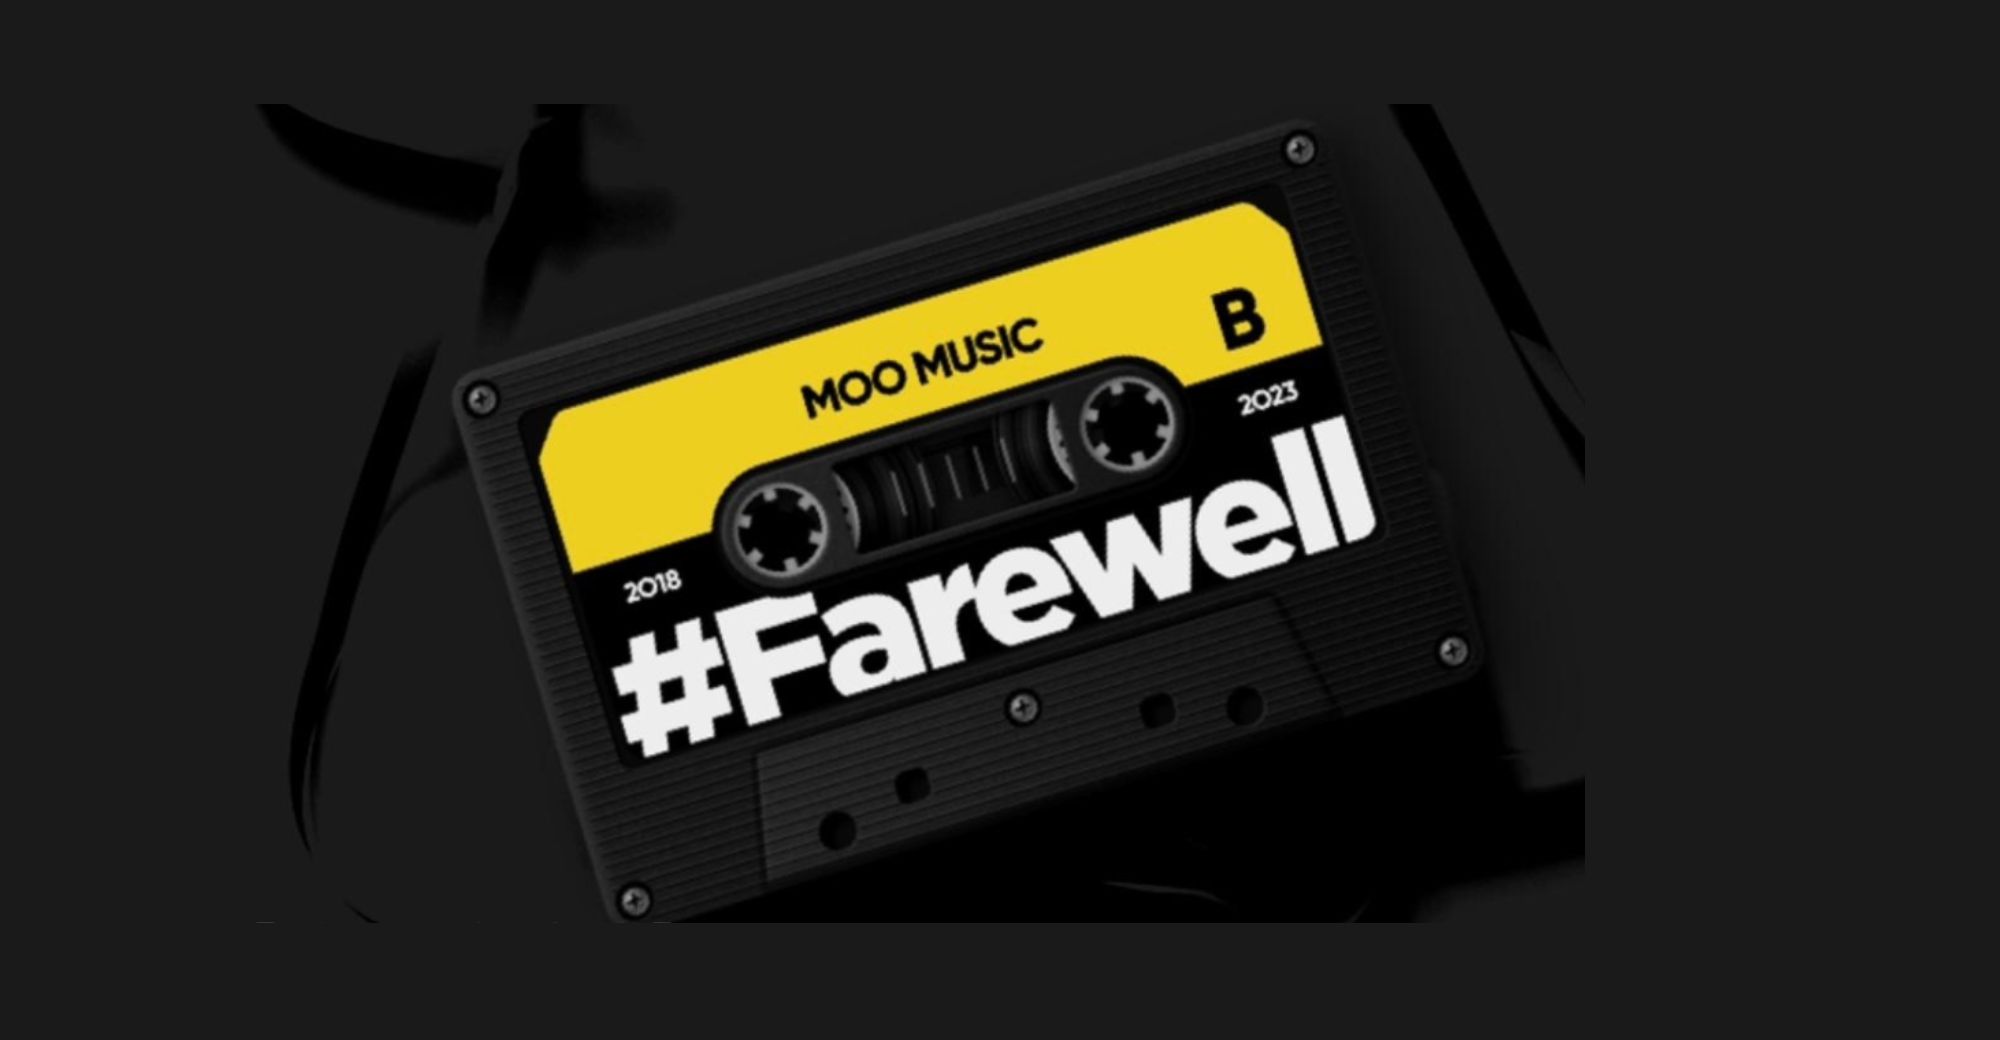 Tencent Will Shut Down MOO Music, Service Ends on December 31st